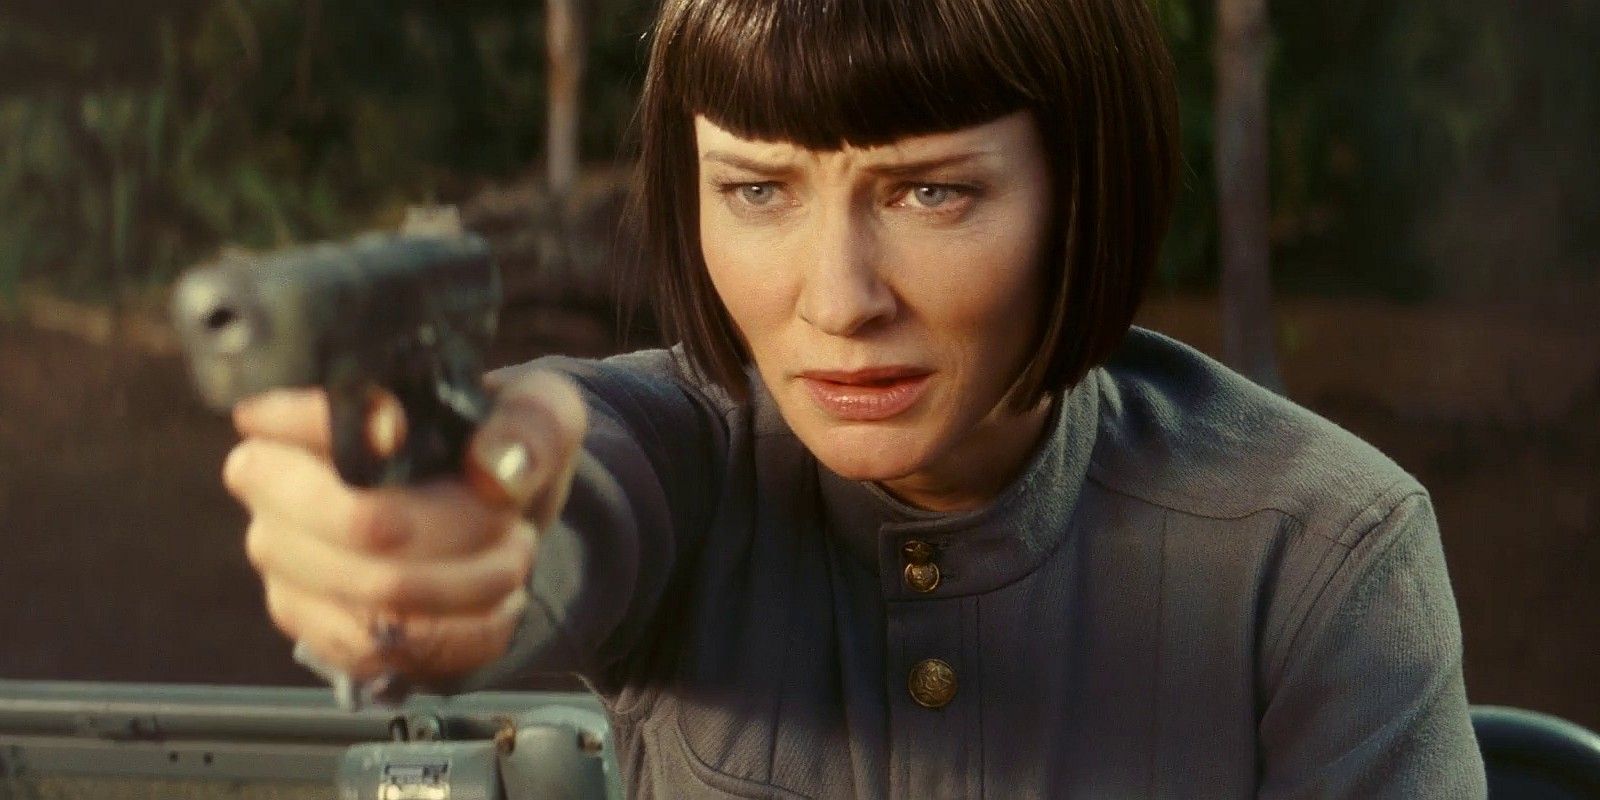 Cate Blanchett in Indiana Jones and the Kingdom of the Crystall Skull